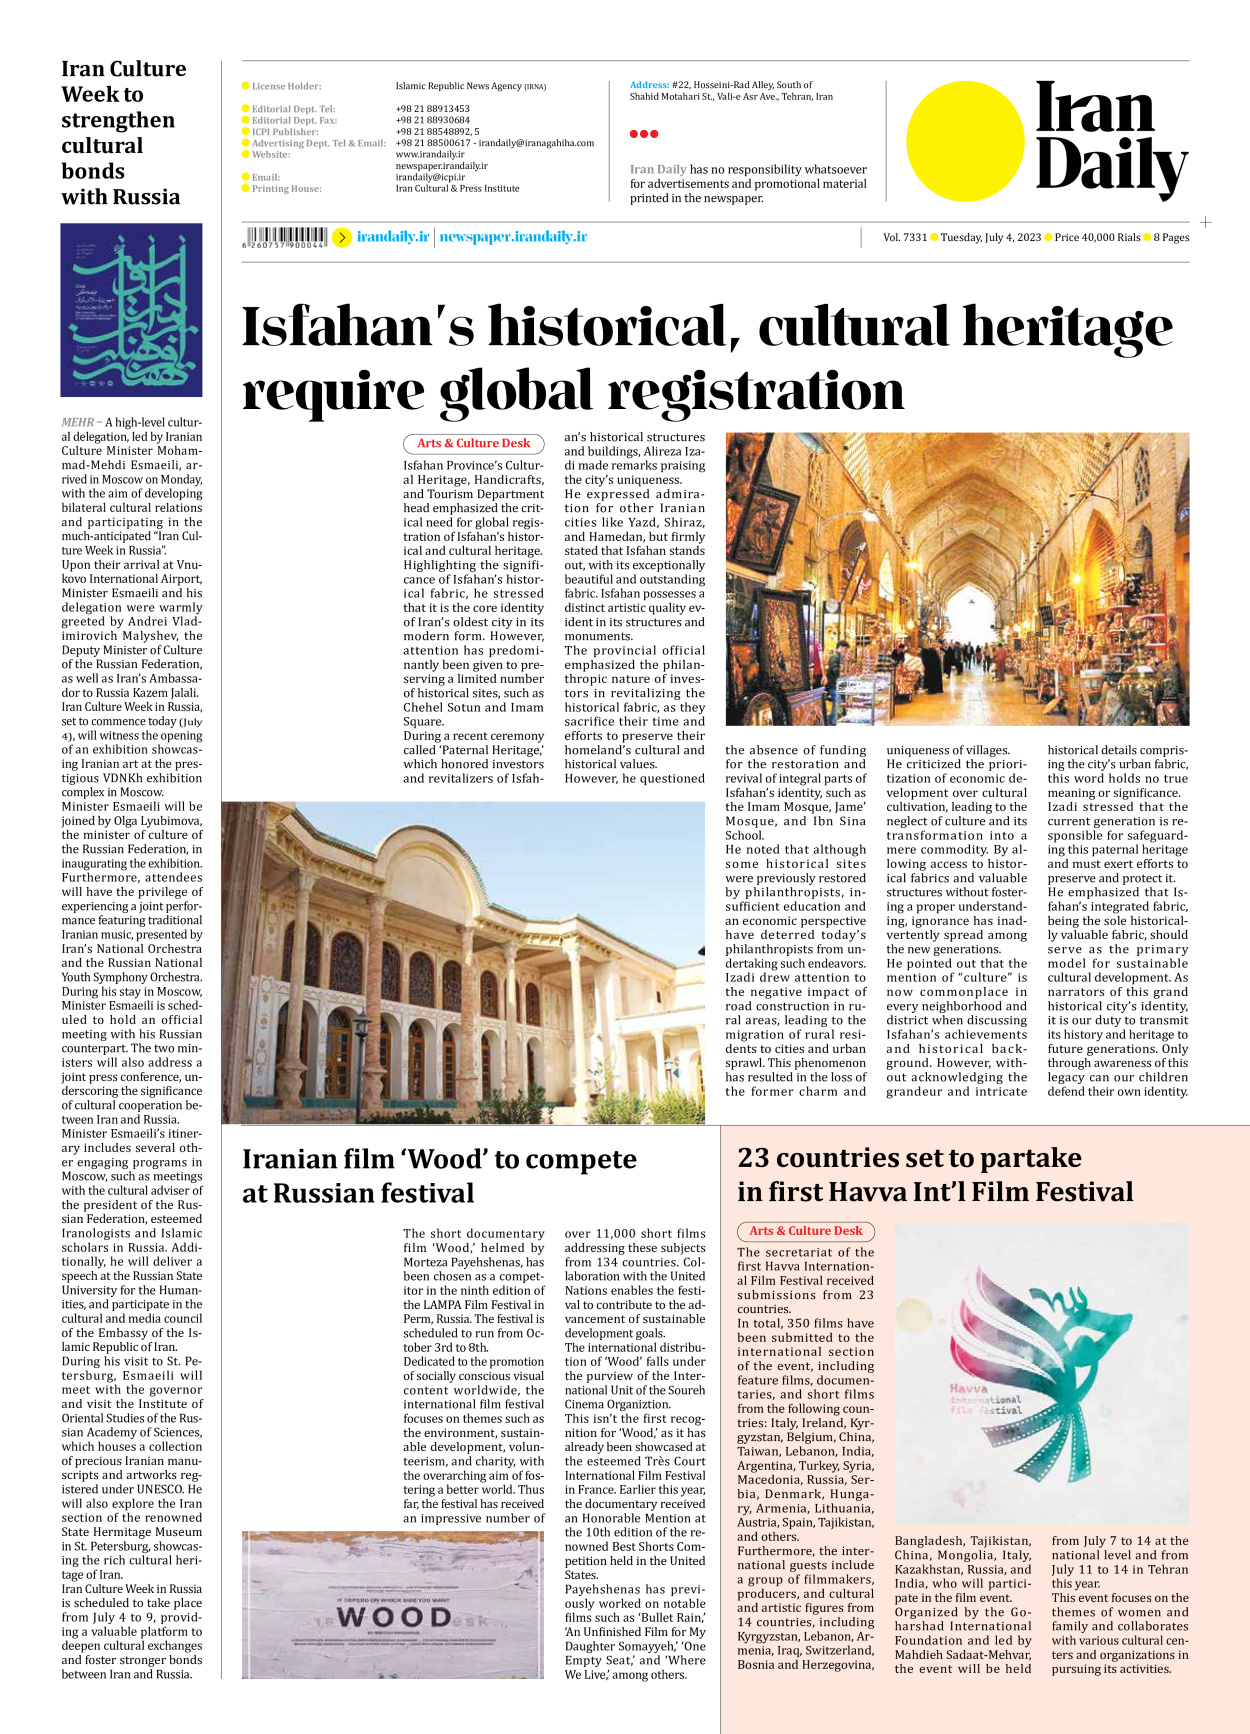 Iran Daily - Number Seven Thousand Three Hundred and Thirty - 04 July 2023 - Page 8